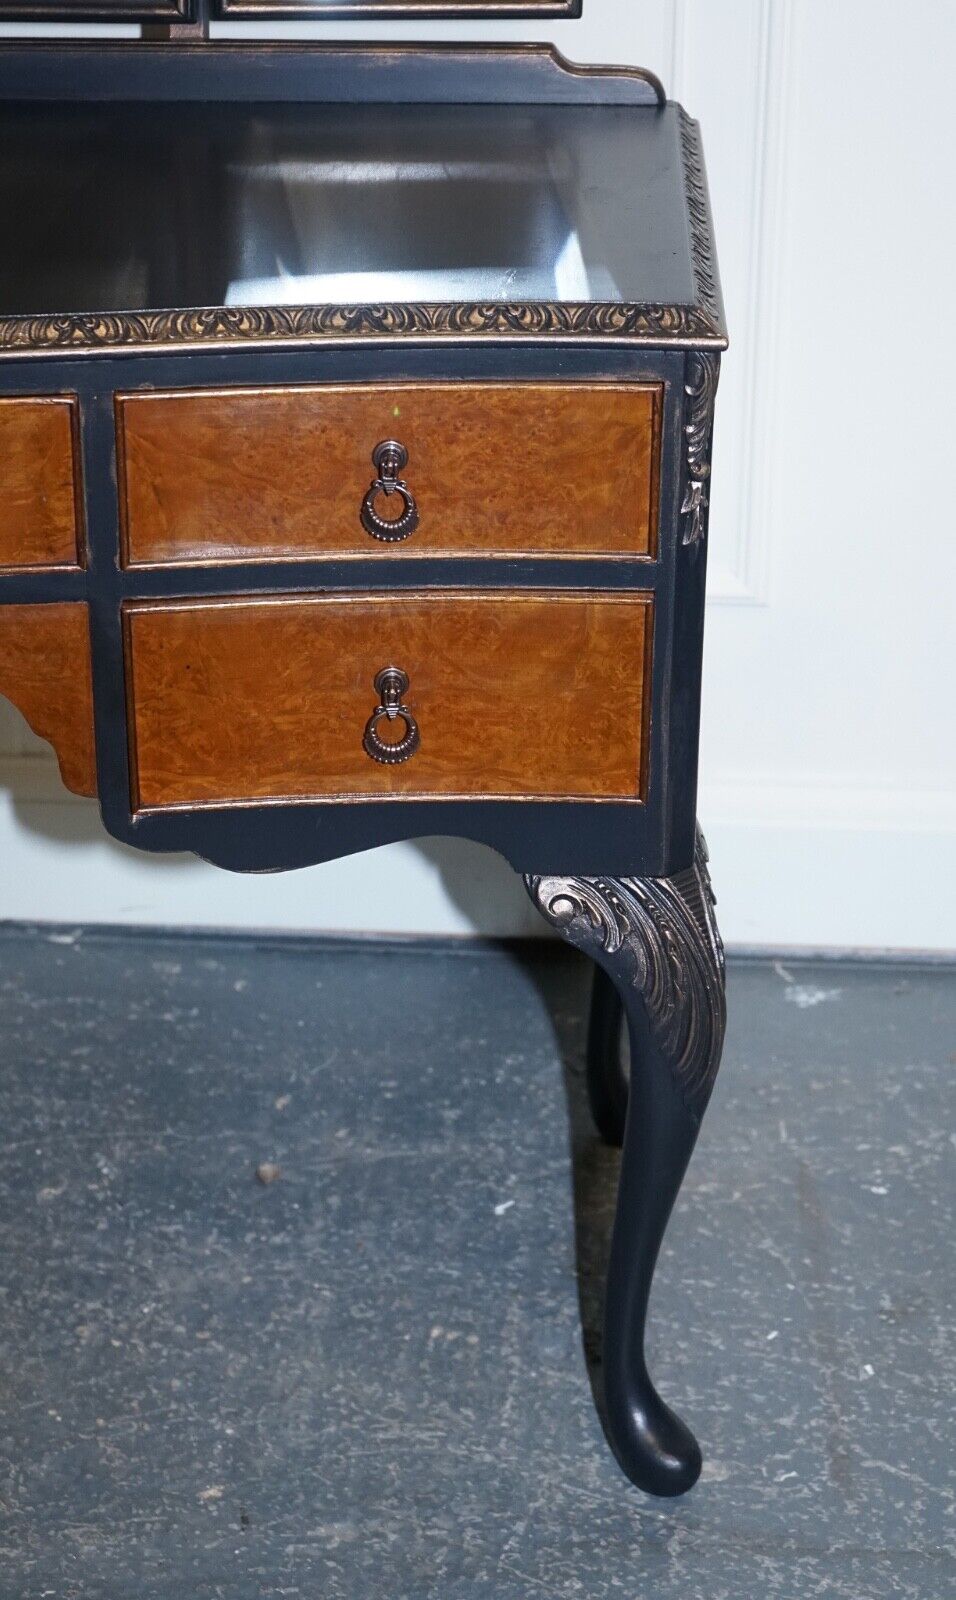 LOVELY ART DECO WALNUT HAND PAINTED DRESSING TABLE ON QUEEN ANN LEGS